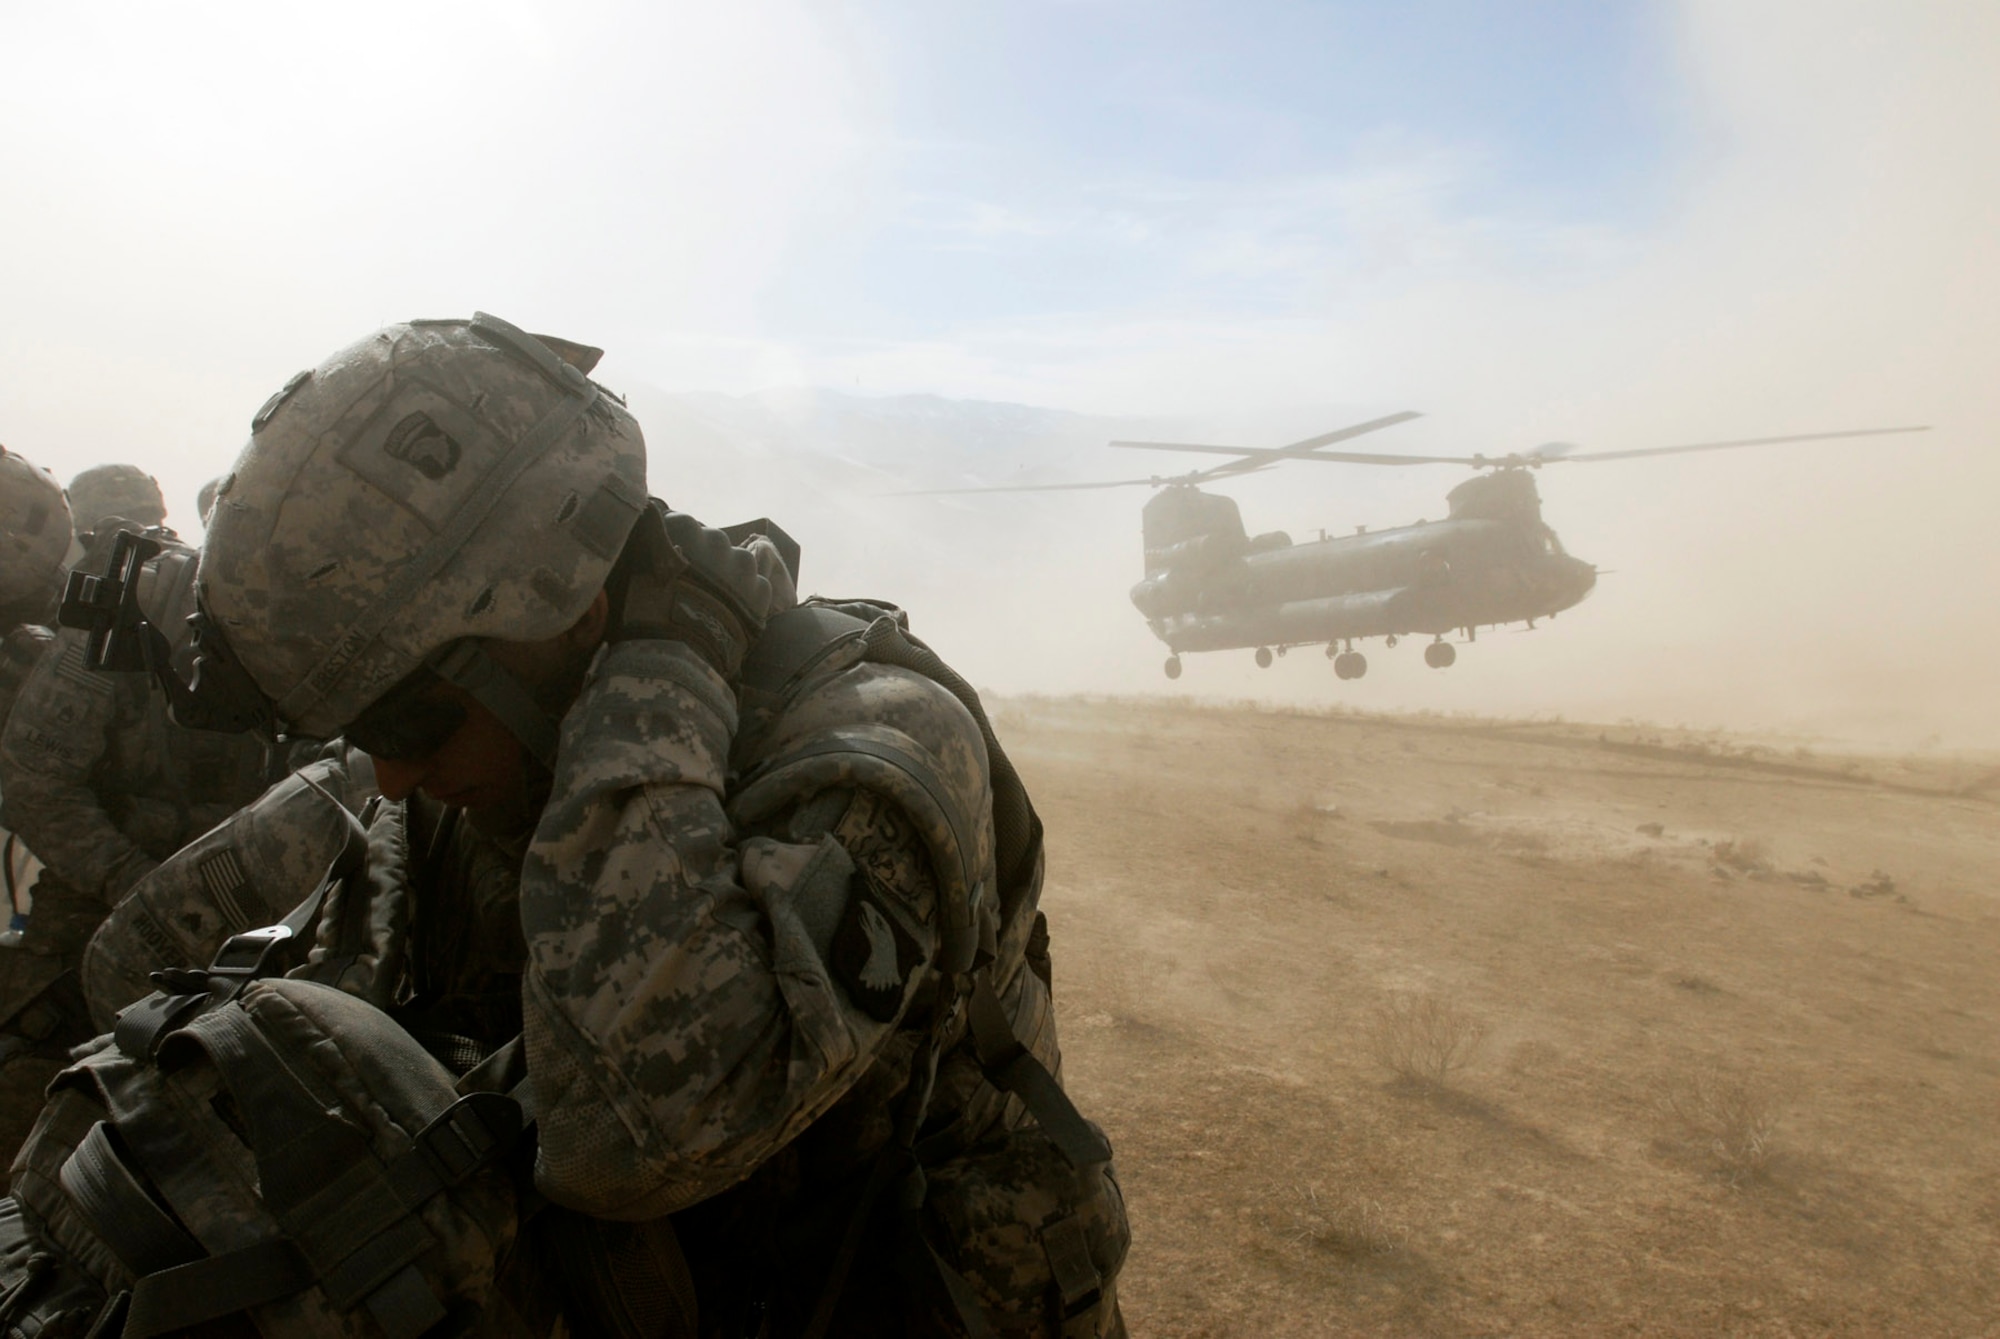 Soldiers with the 101st Airborne Division shield themselves from flying debris and dusty winds as a Chinook helicopter touches down to take them back to Bagram Air Field after an air assault mission in eastern Afghanistan Nov. 4, 2008. (Photo by Spc. Mary L. Gonzalez, CJTF-101 Public Affairs)